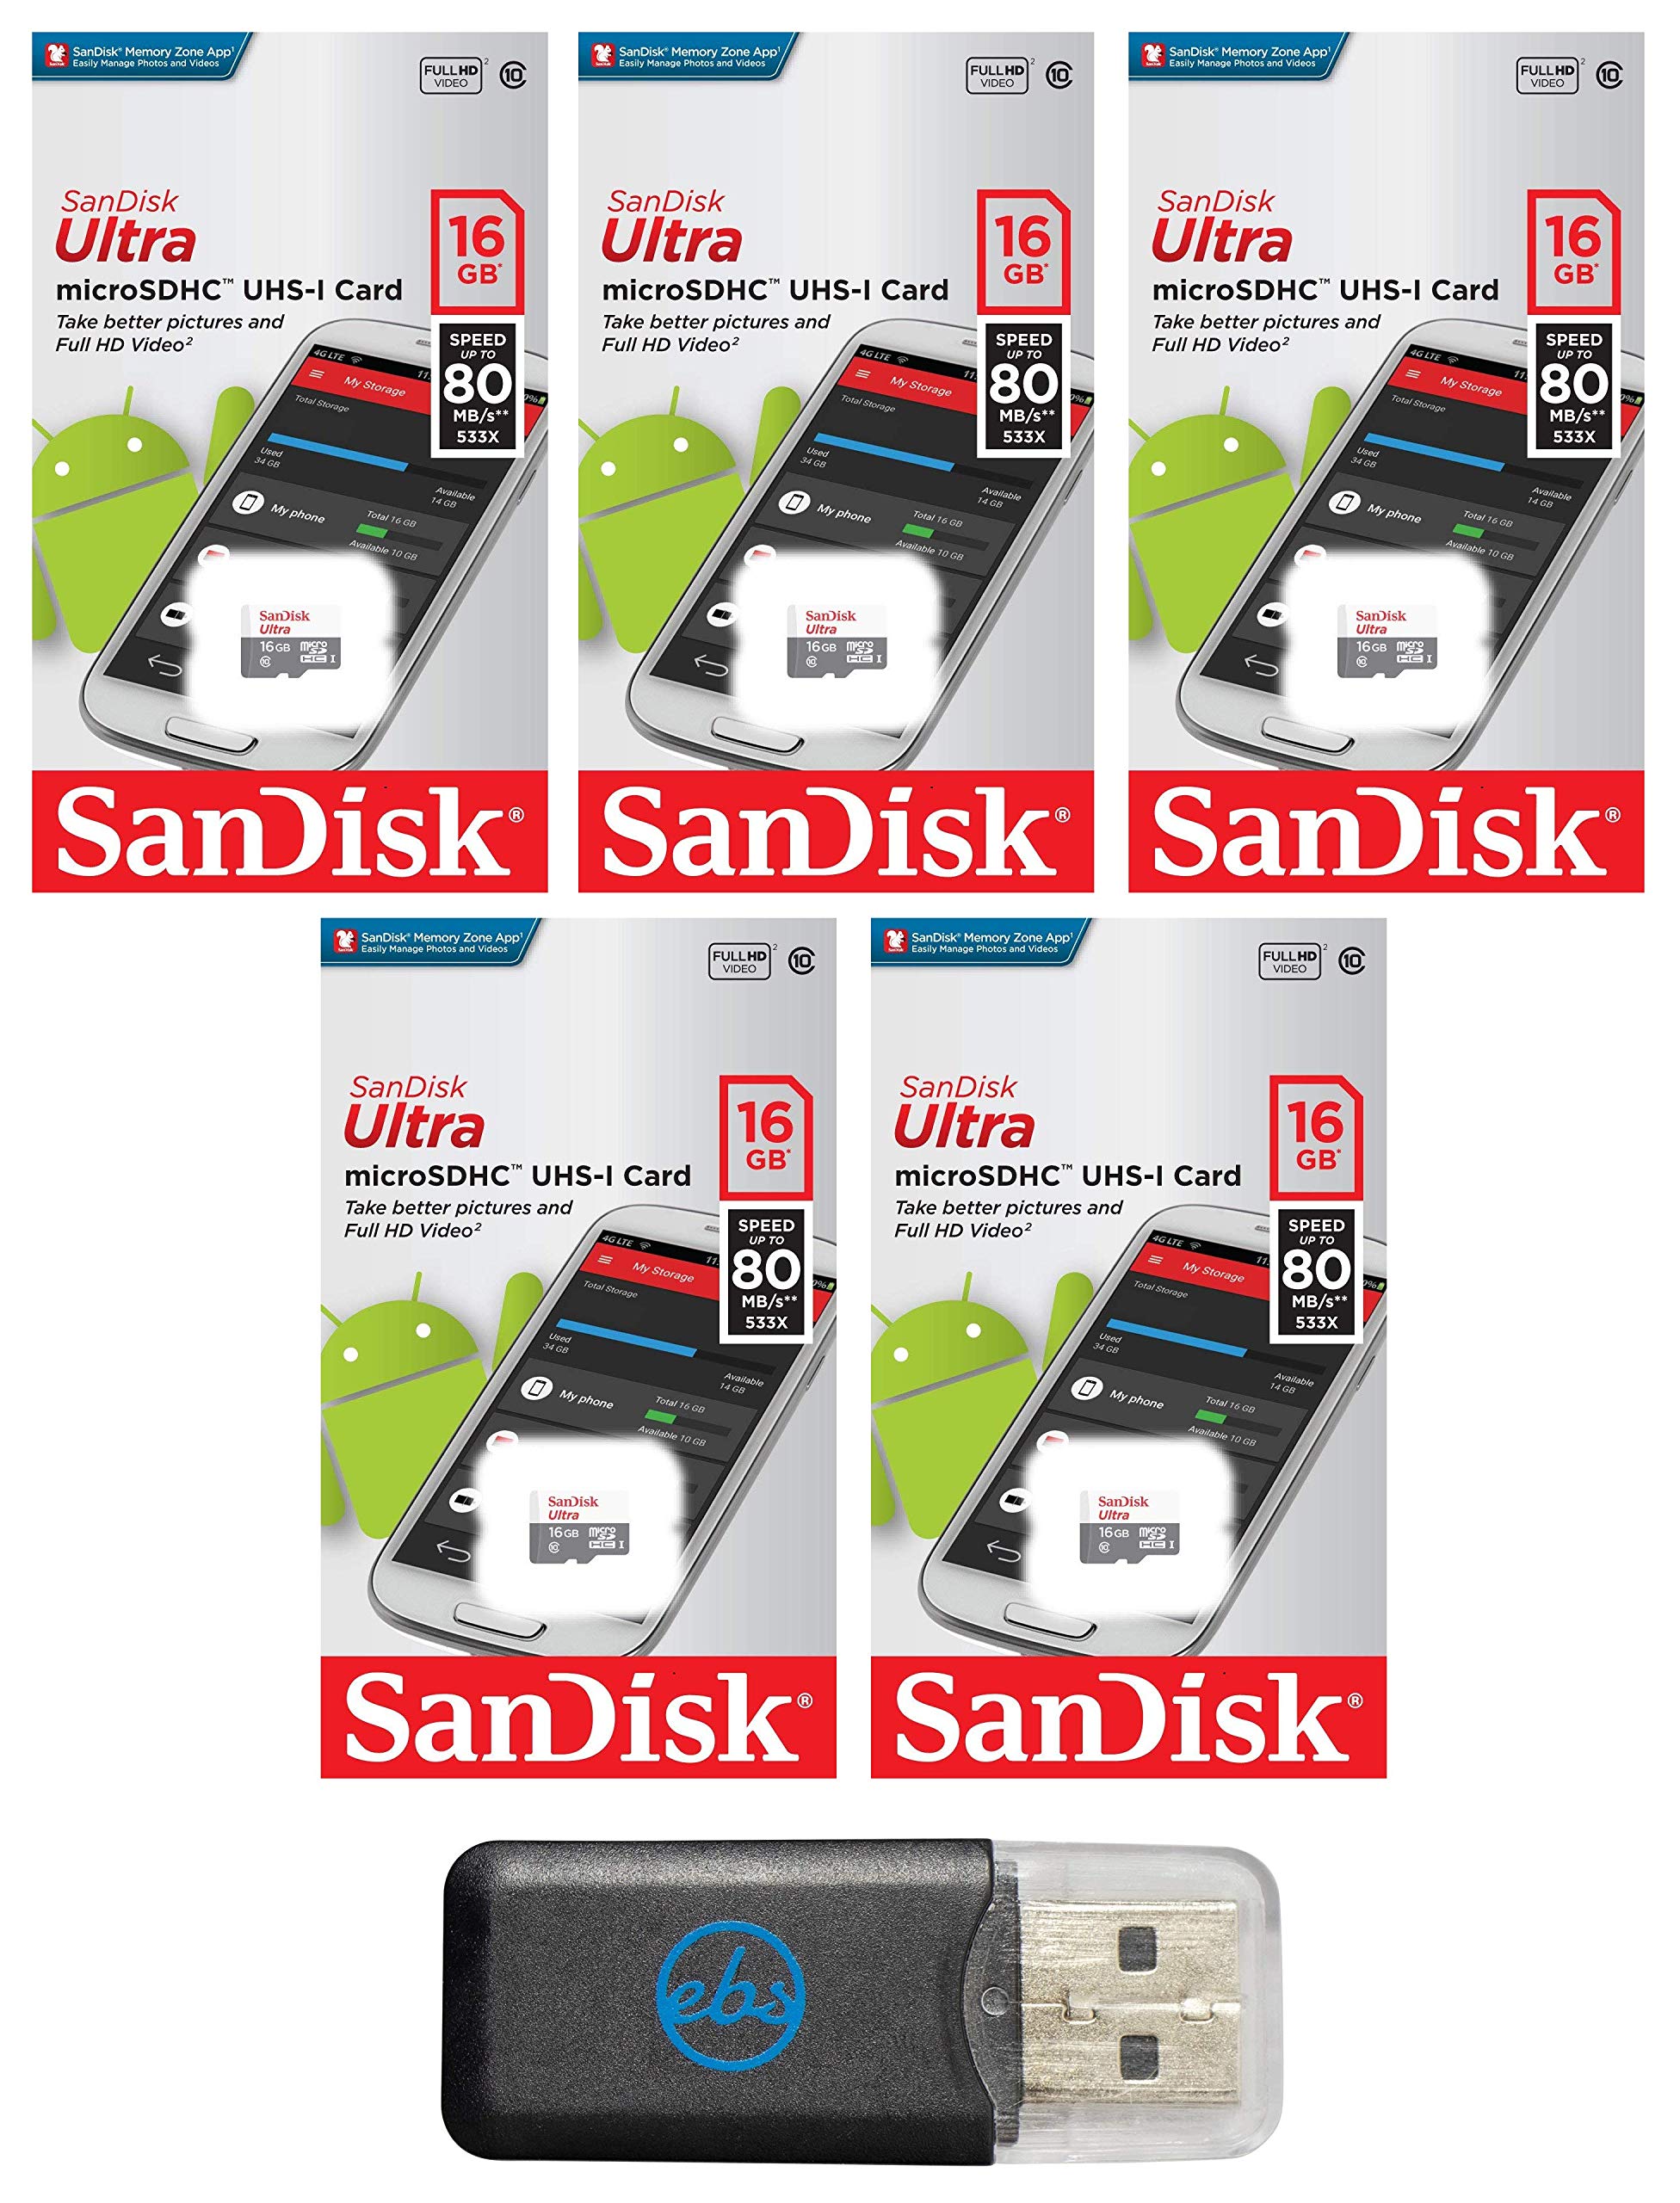 SanDisk Micro SDHC Ultra 5 Pack MicroSD TF Flash Memory Card 16GB 16G Class 10 SDSQUNB-016G Bundle with Everything But Stro